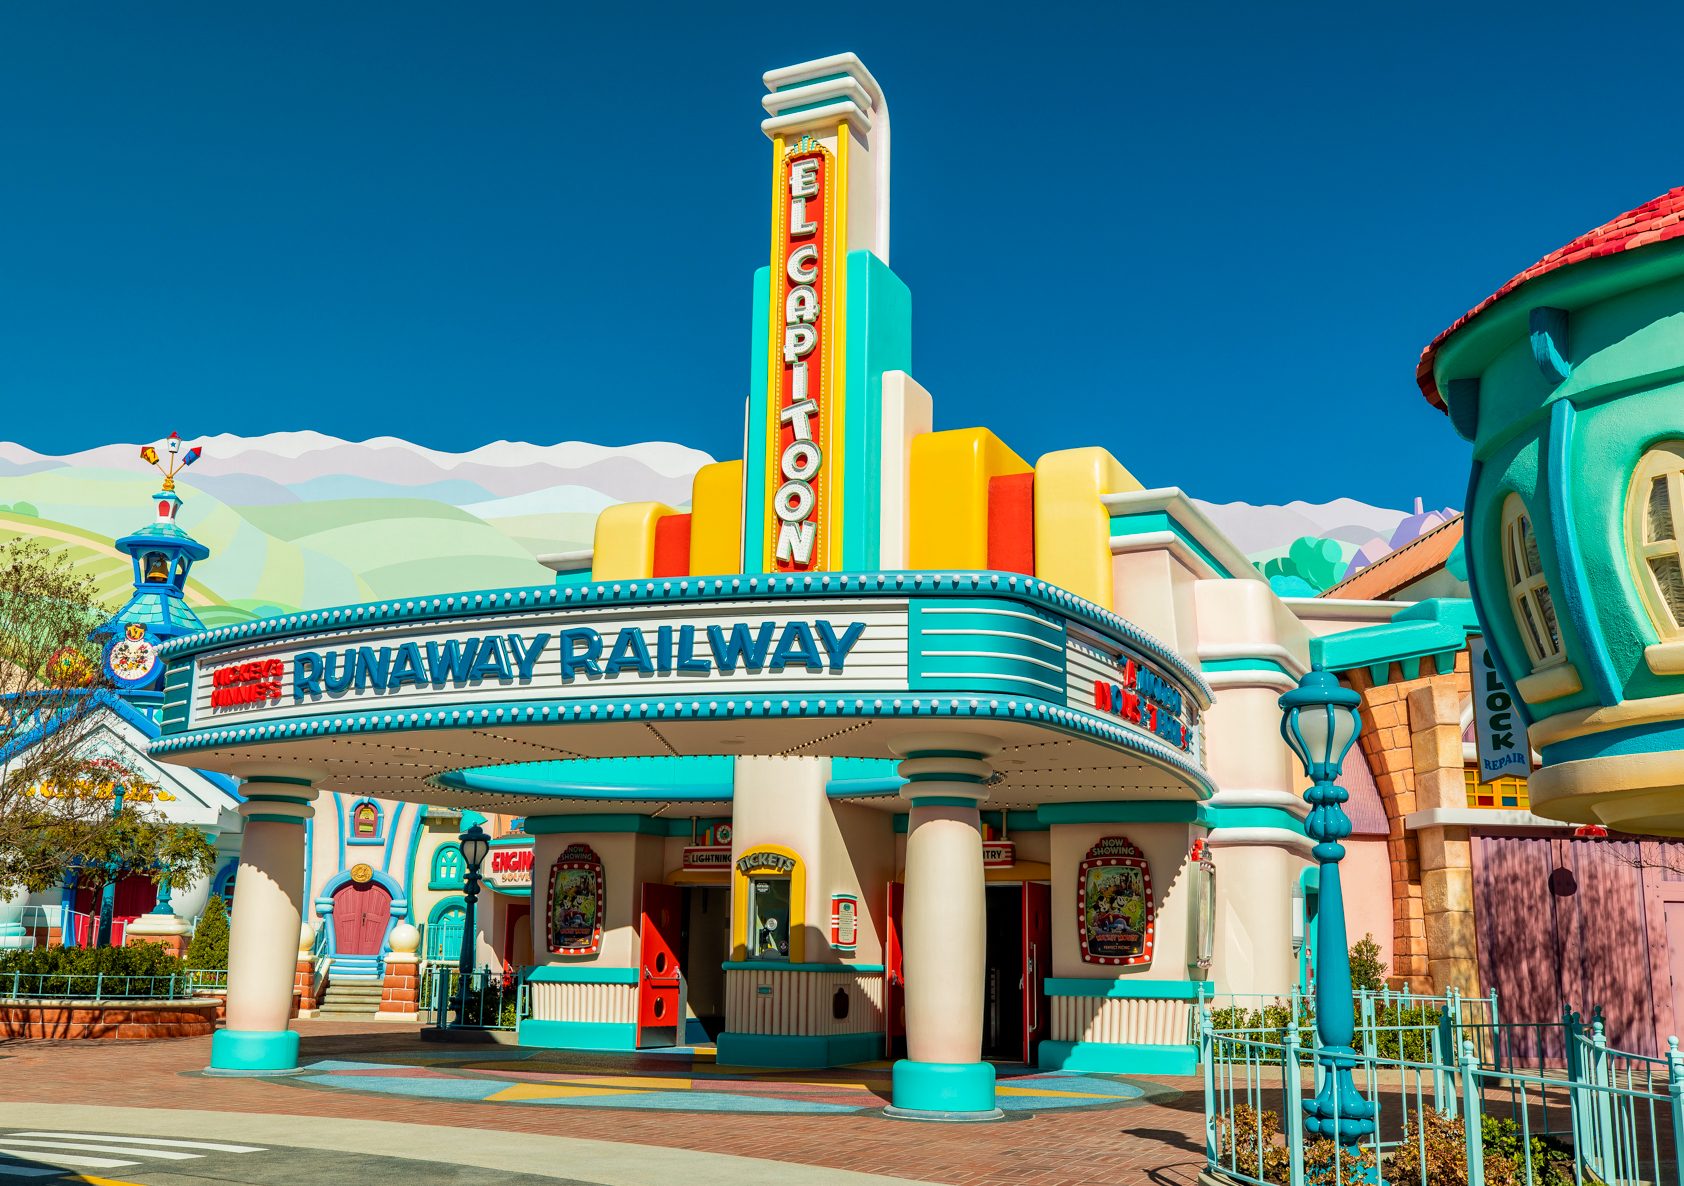 Mickey & Minnie's Runaway Railway will open at Disneyland Park on Jan. 27, 2023, when the Disney100 anniversary celebration comes to life at Disneyland Resort in Anaheim, Calif. Guests step into the cartoon world of Mickey Mouse and Minnie Mouse, where they'll board a train with Goofy as the engineer for an out-of-control adventure filled with surprising twists and turns. (Christian Thompson/Disneyland Resort)